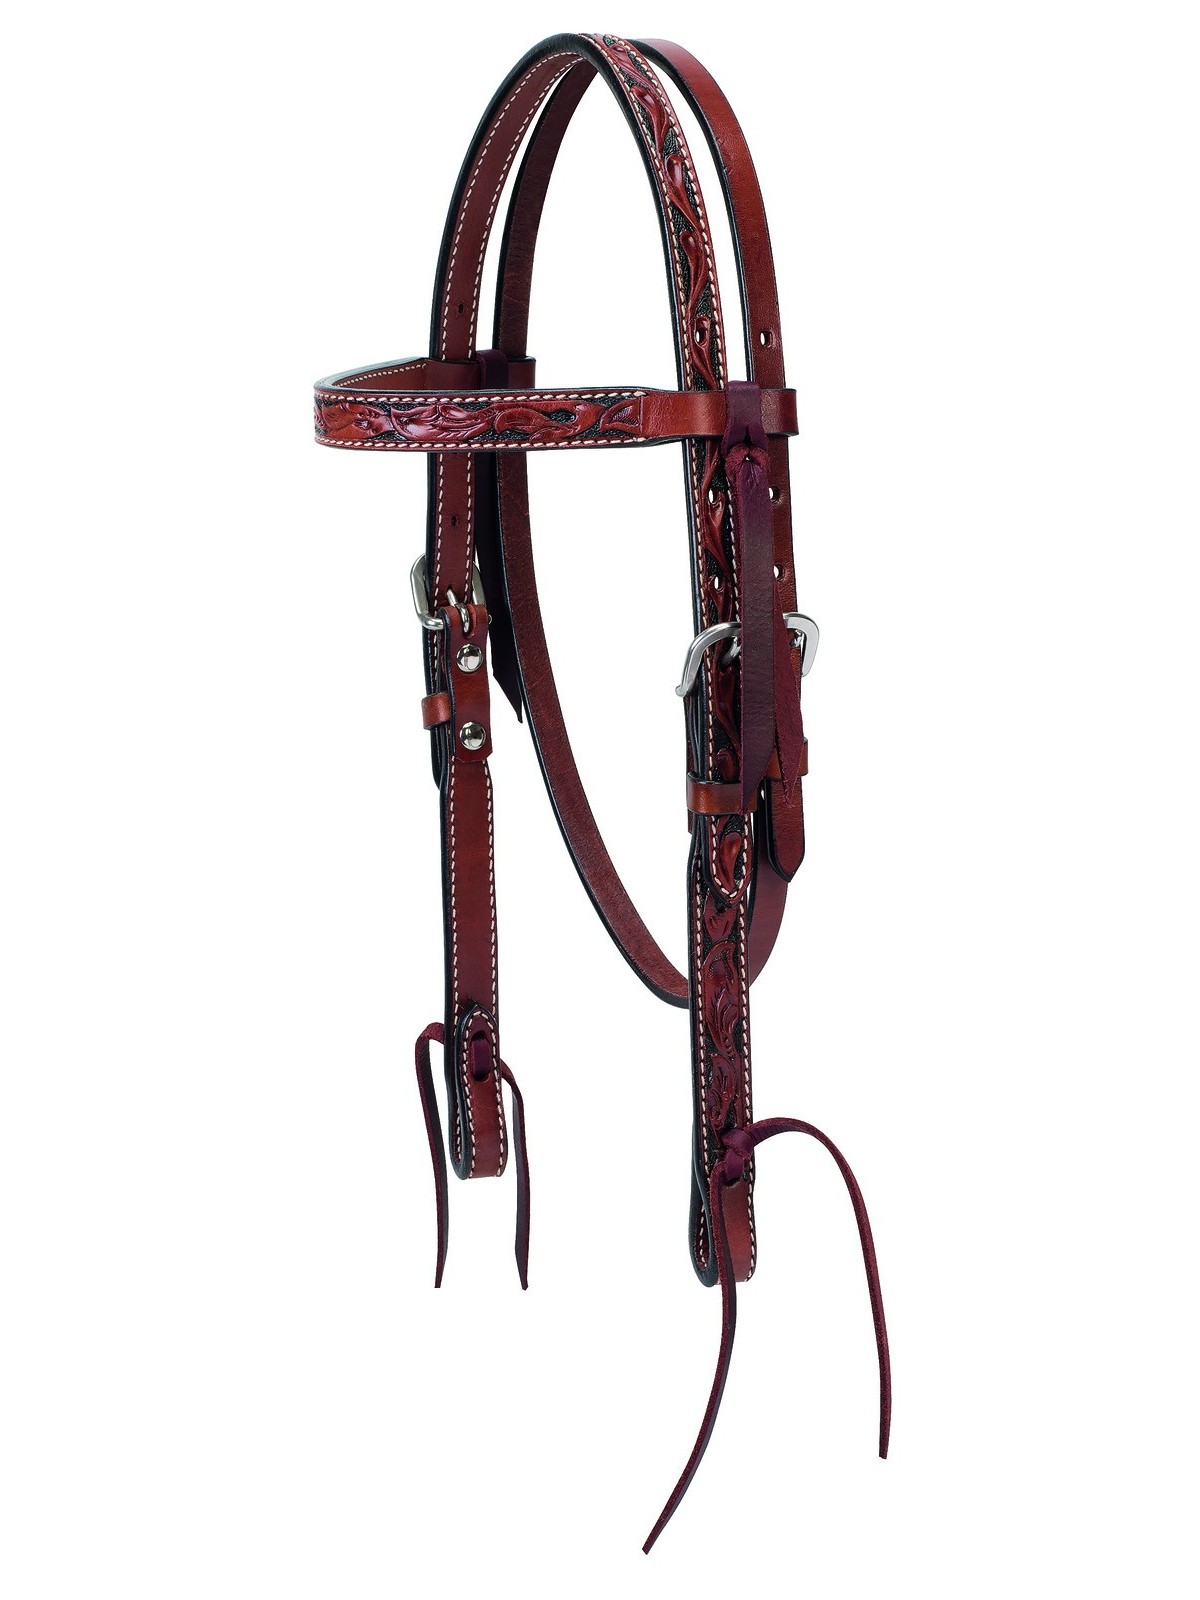 Turqoise Cross PONY Carved Chestnut Headstall 45-0146